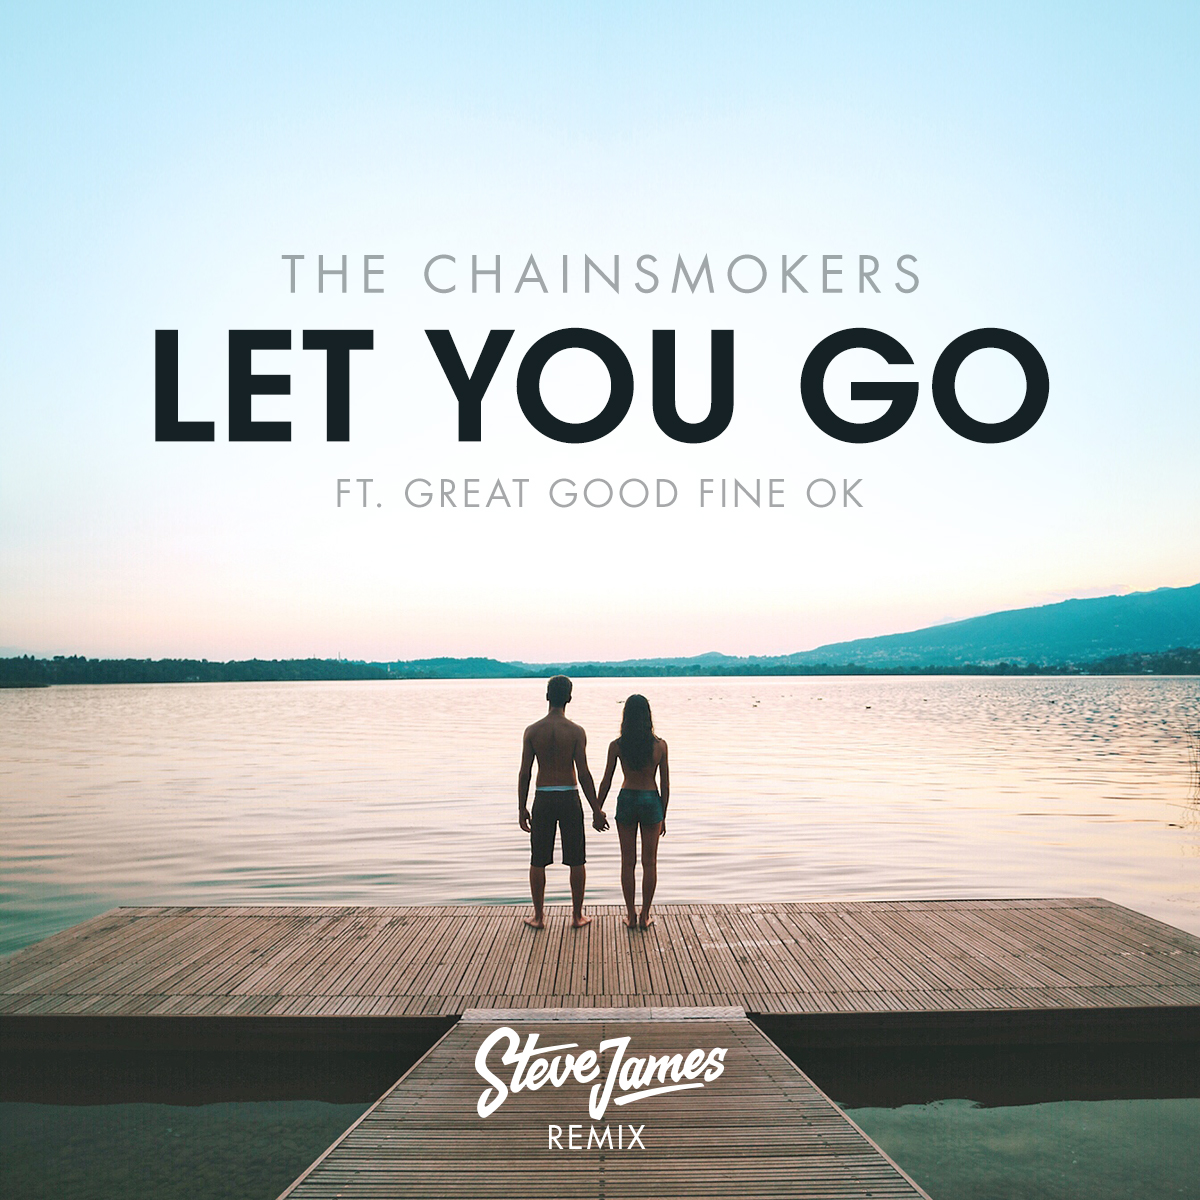 I m not let you go. Let you go. The Chainsmokers — Let you go. Letting you go. Let you go фото.